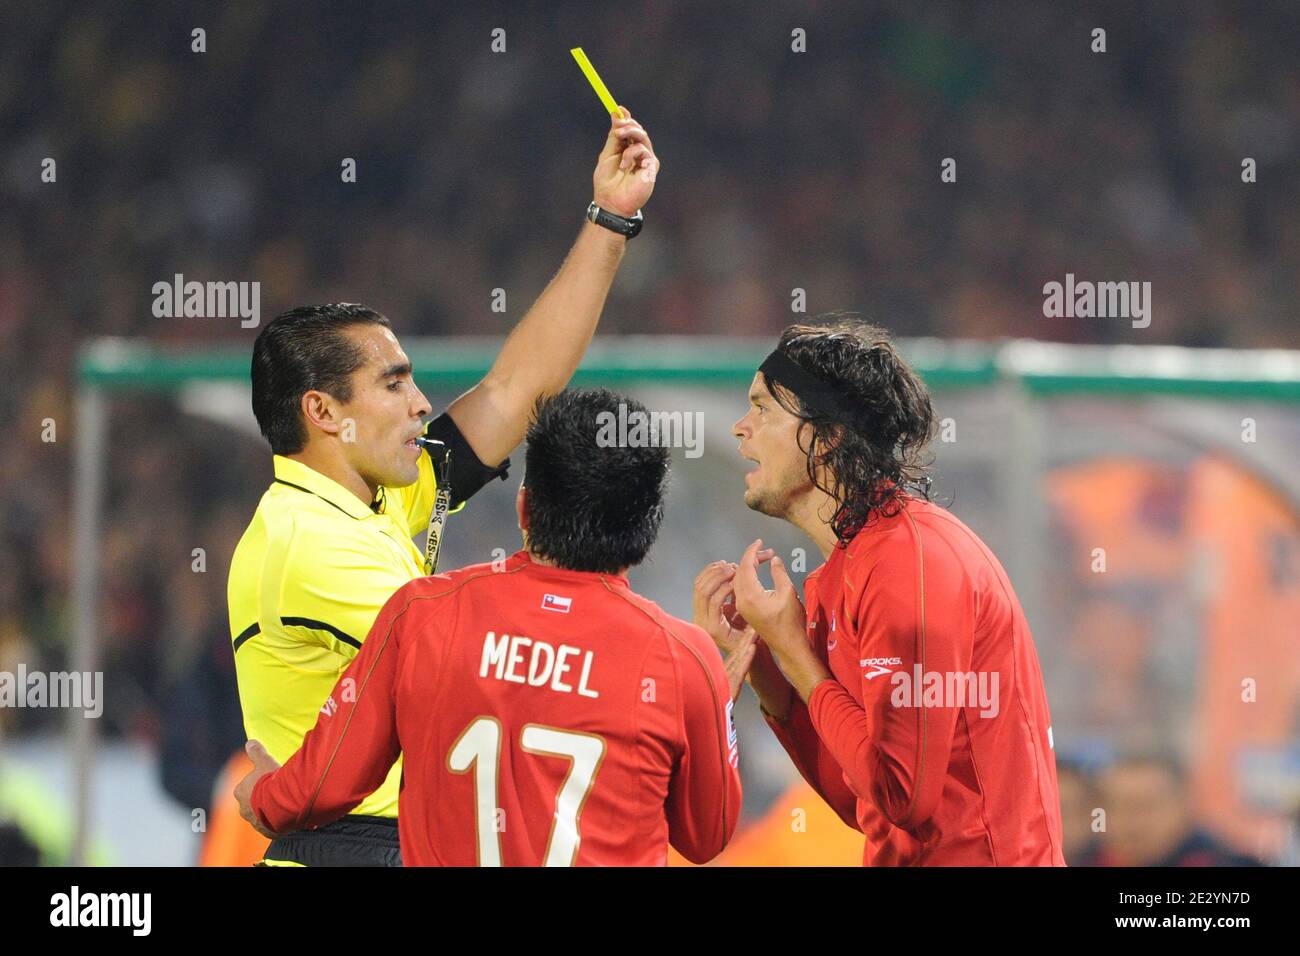 Referee Marco Rodriguez gives a yellow card to Chile's Waldo Ponce during the 2010 FIFA World Cup South Africa Soccer match, group H, Spain vs Chile at Loftus Versfeld football stadium in Pretoria, South Africa on June 25, 2010. Spain won 2-1. Photo by Henri Szwarc/ABACAPRESS.COM Stock Photo